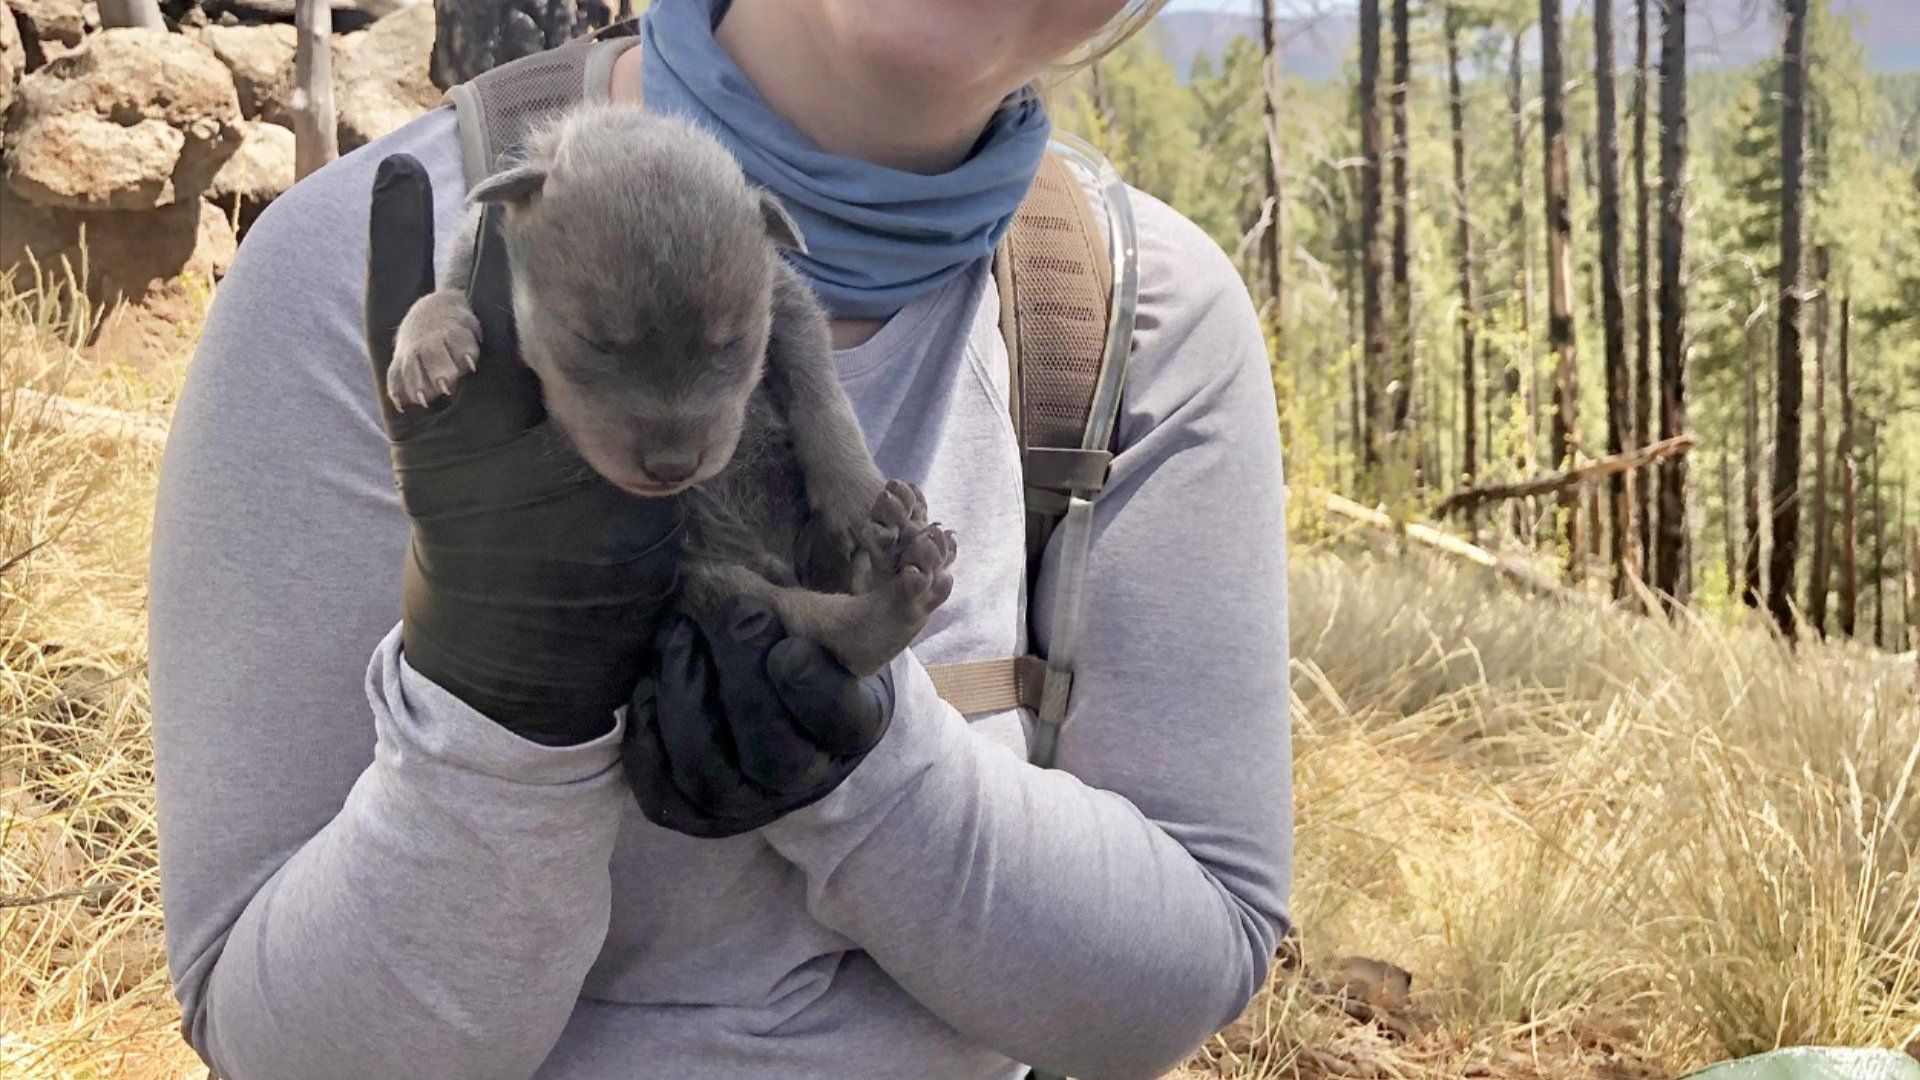 Southwest Wildlife Hospital Manager Kacie Willcuts Holds Pup Before Placement in the Wild